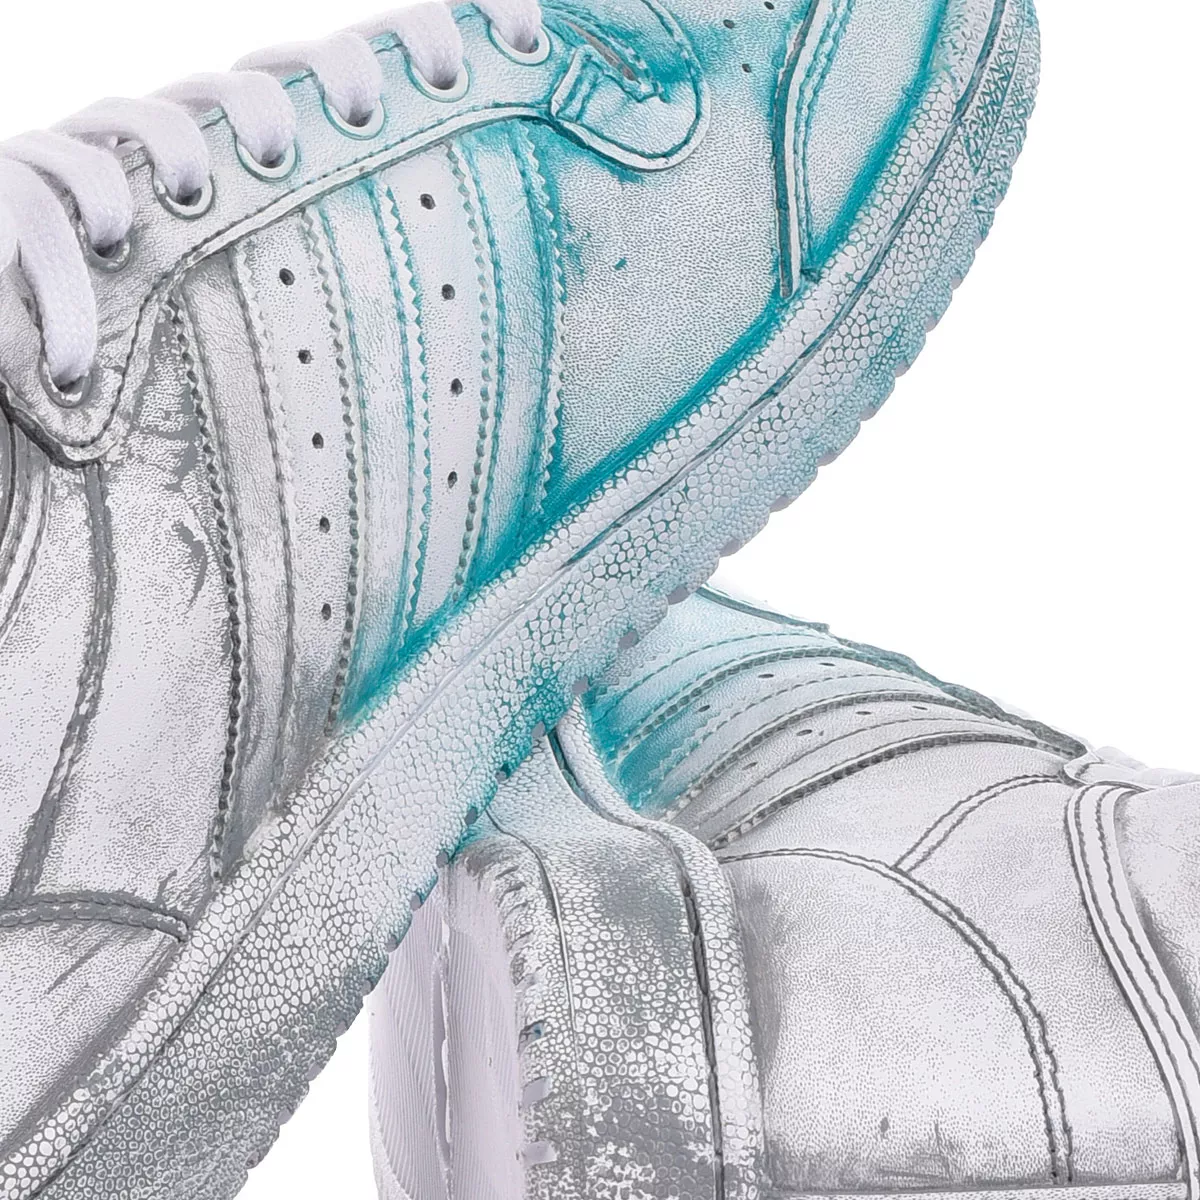 Adidas Top Ten Ice  Washed-out